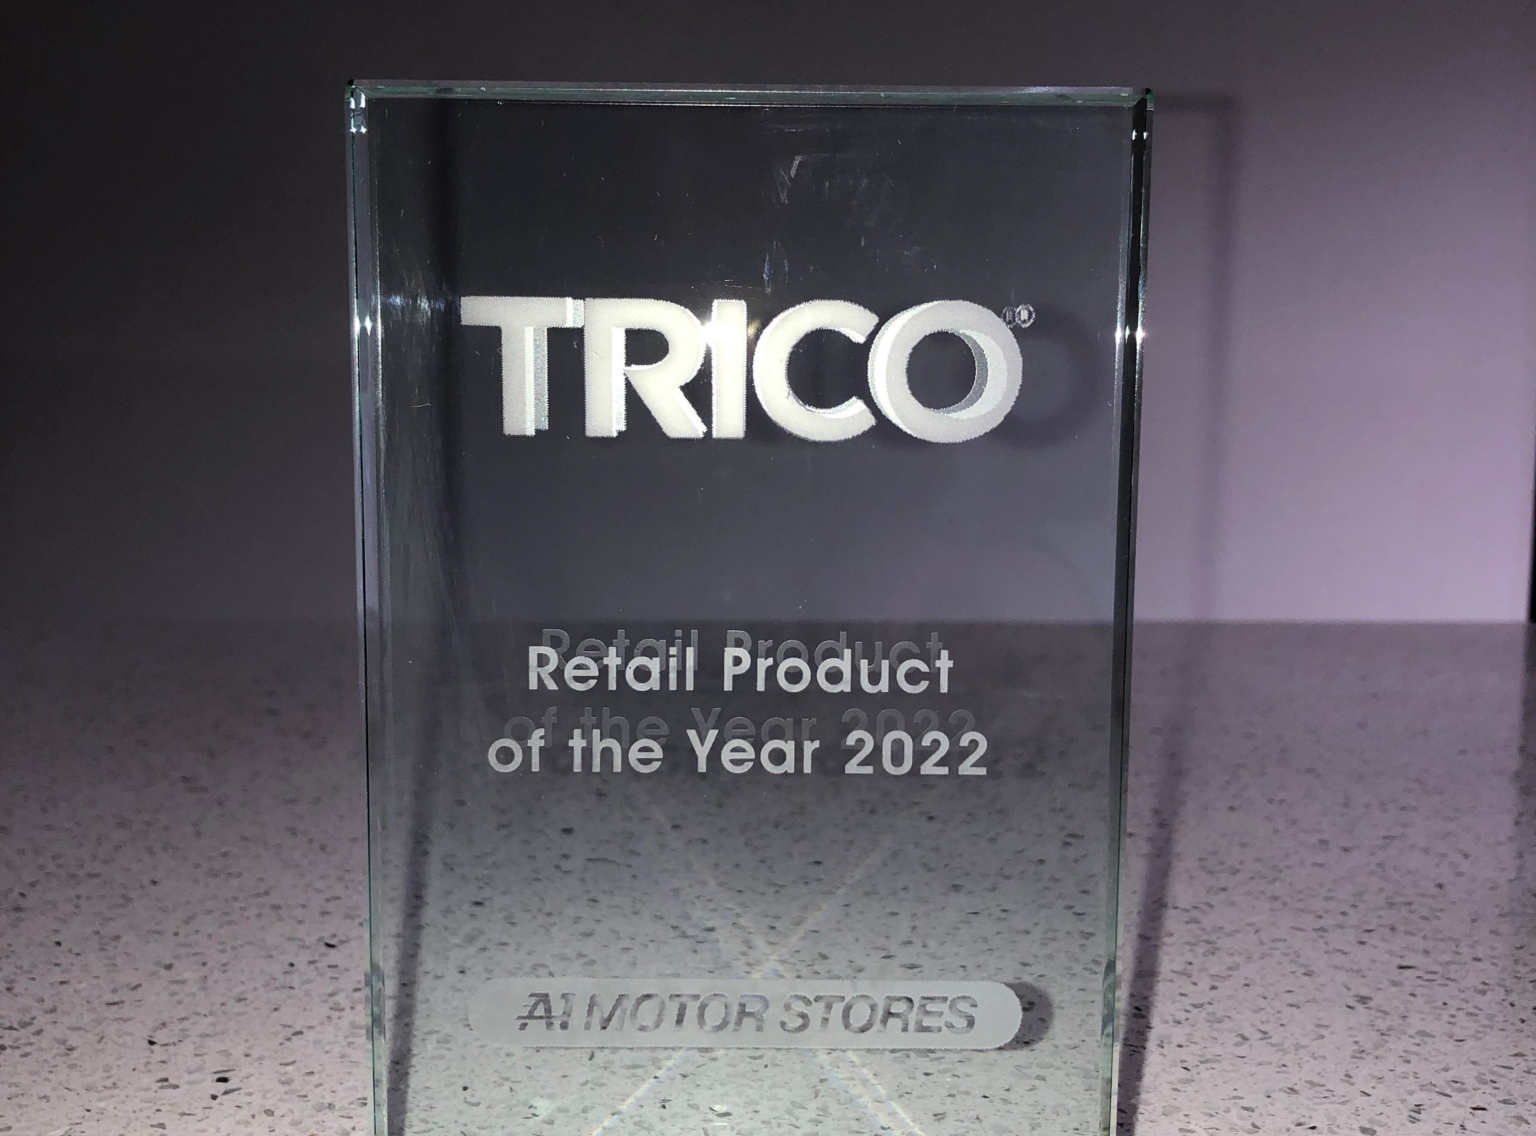 Trico scoops A1 award for fifth year running